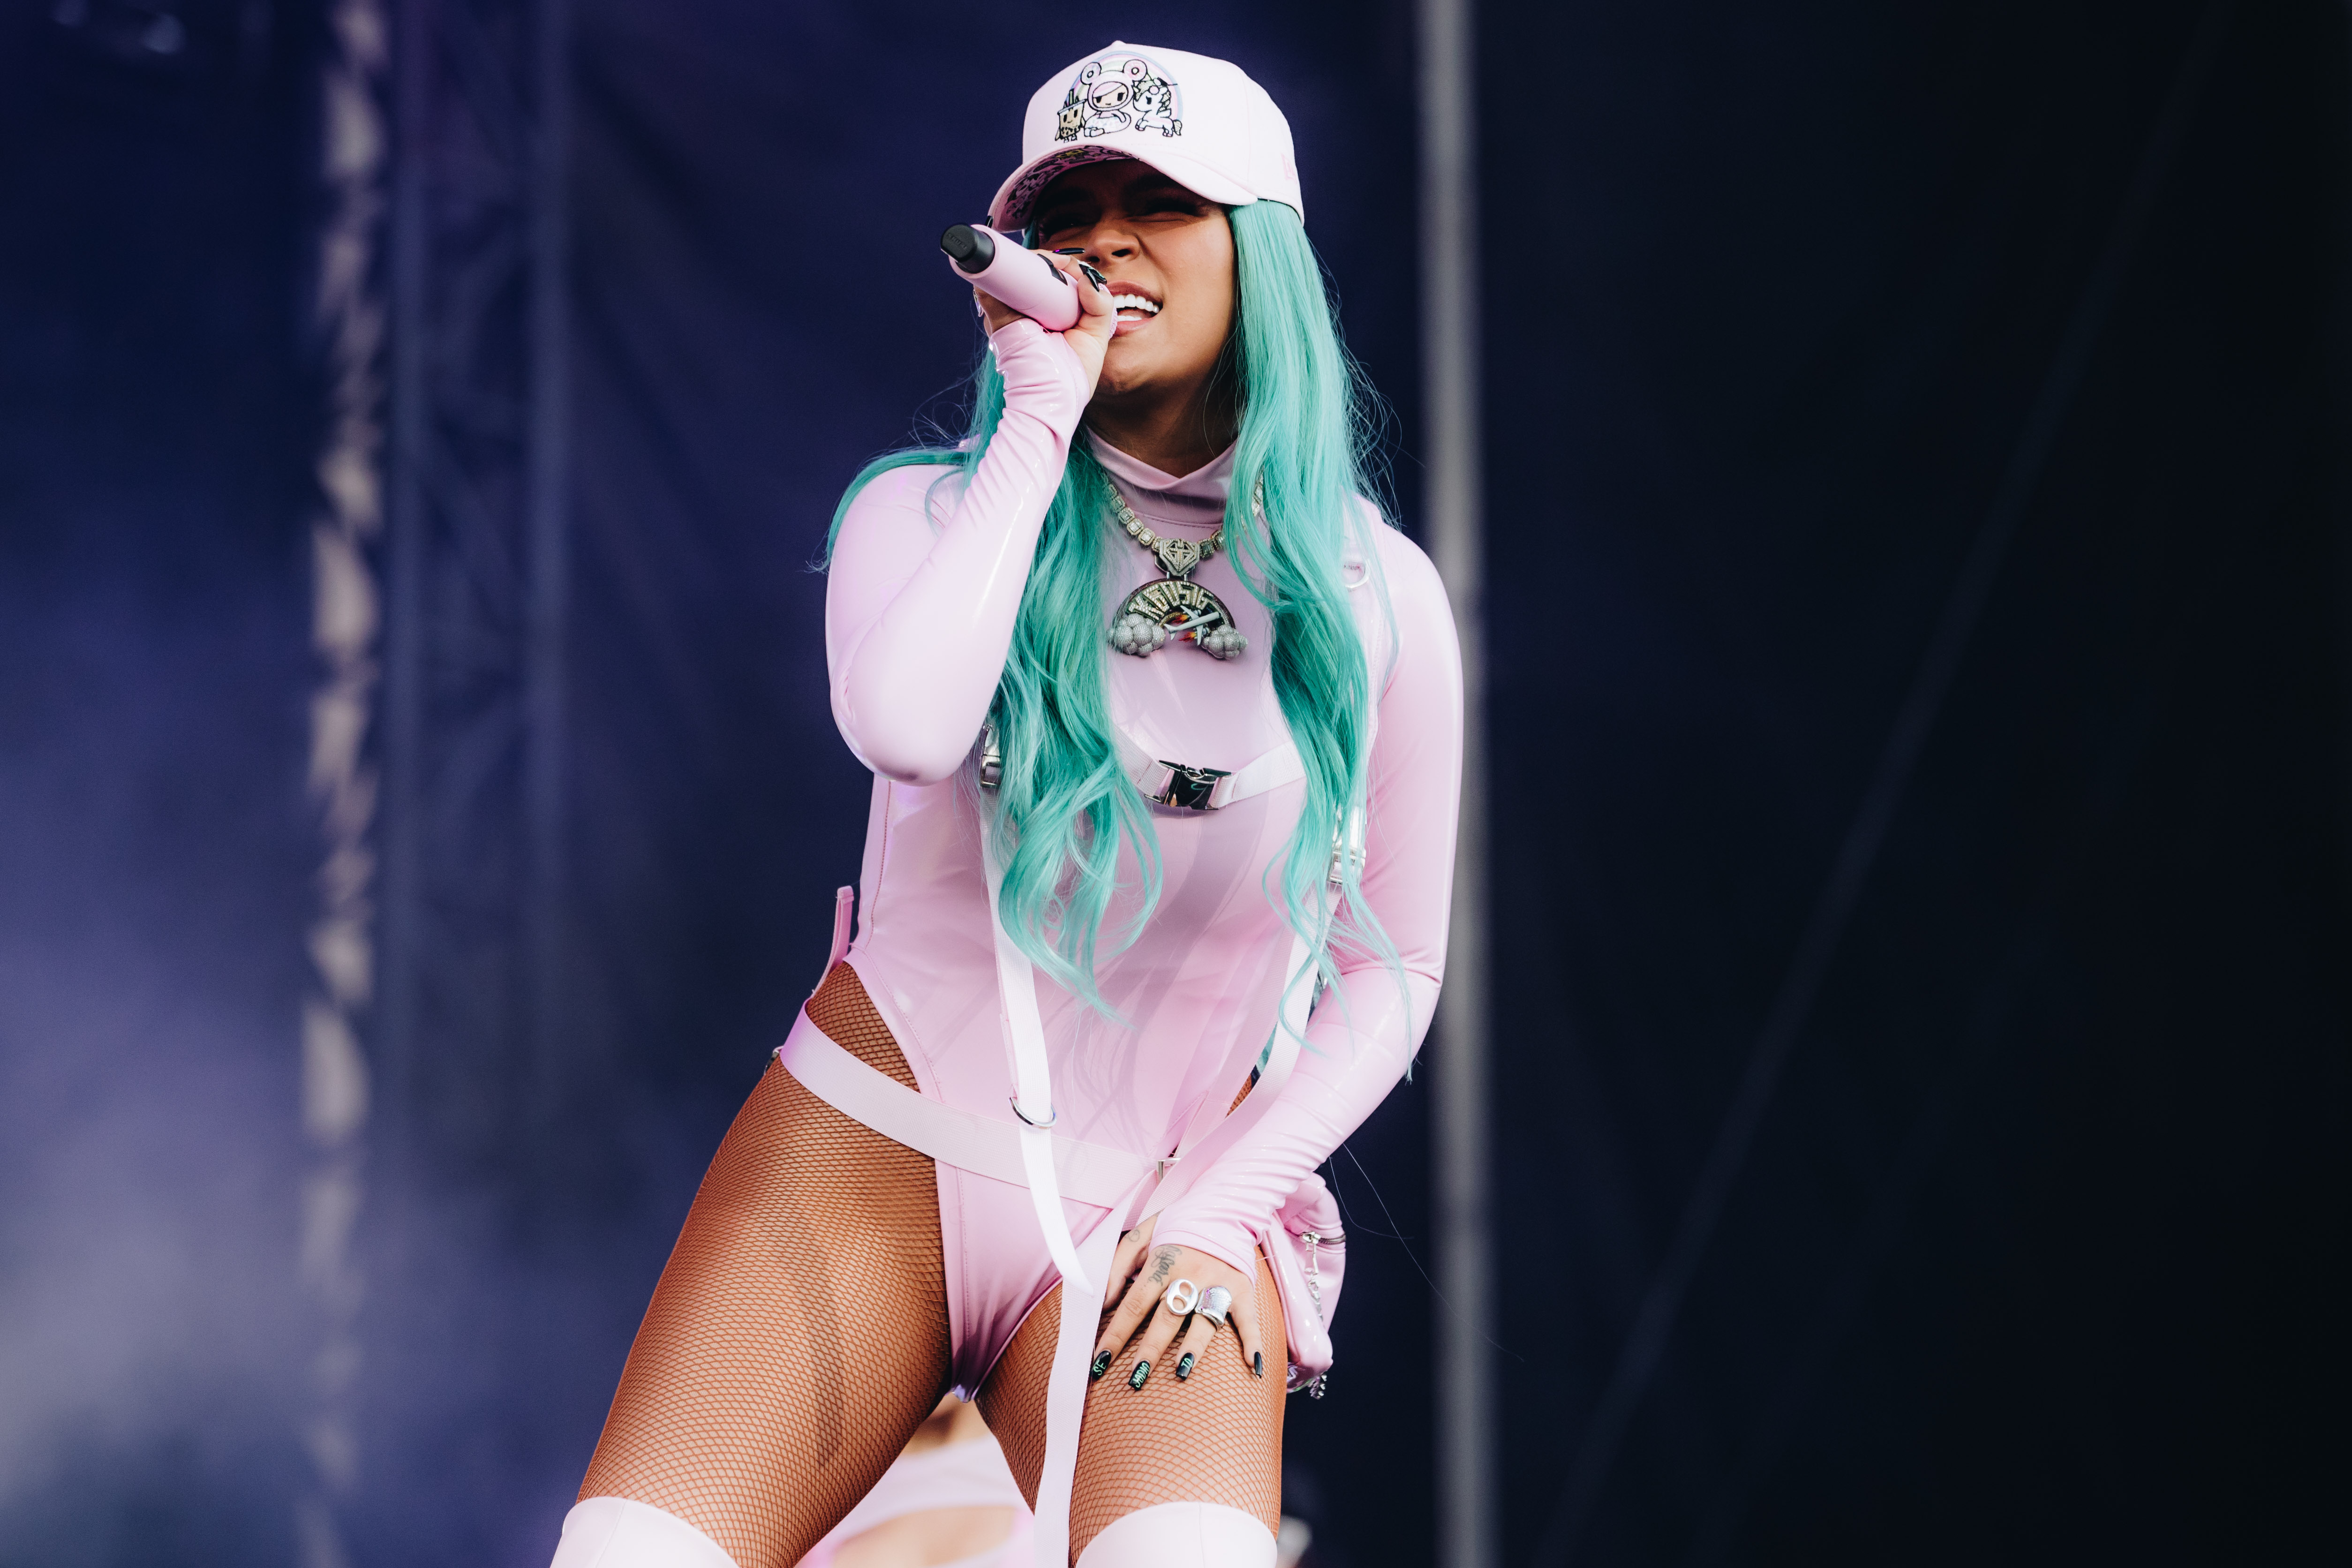 AUSTIN, TEXAS - OCTOBER 03: Karol G performs onstage during Austin City Limits Festival at Zilker Park on October 03, 2021 in Austin, Texas. (Photo by Rich Fury/Getty Images)